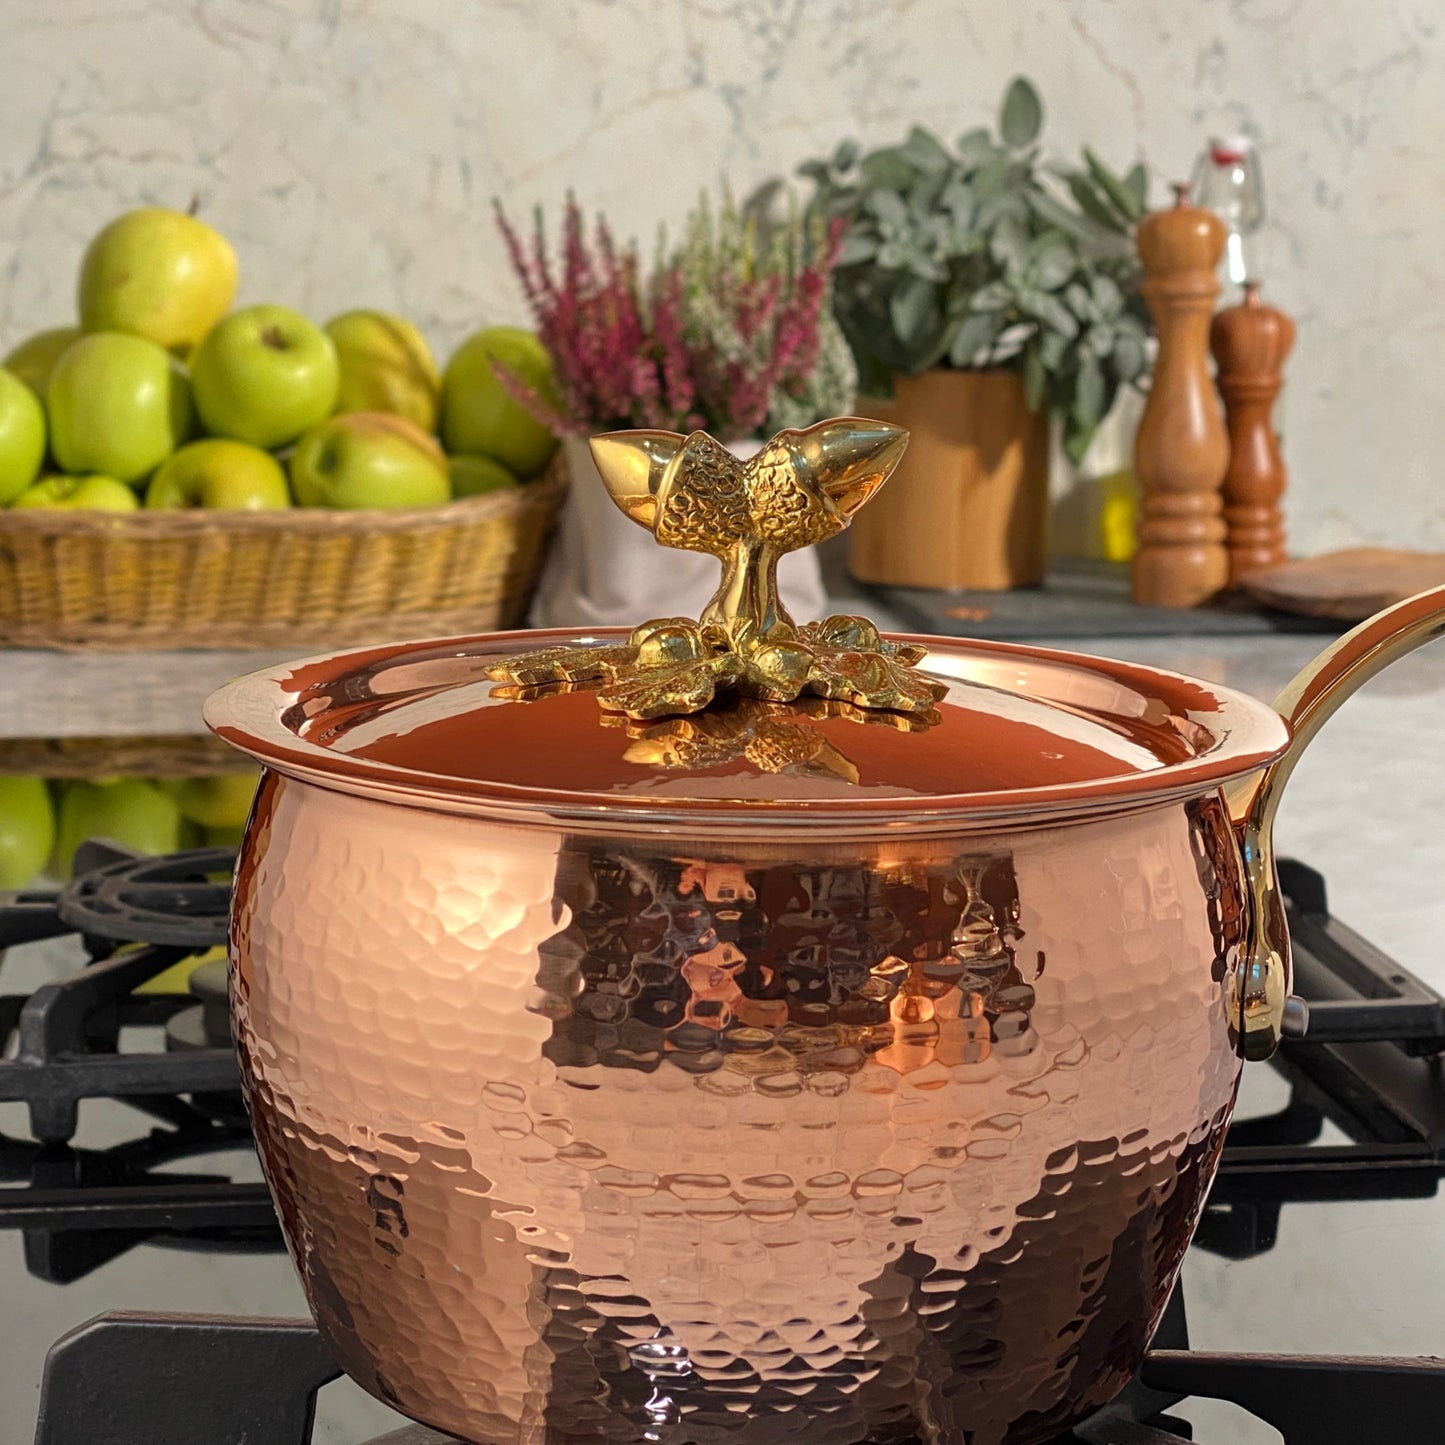 Hand-hammered copper, tin-lined saucepan from Ruffoni